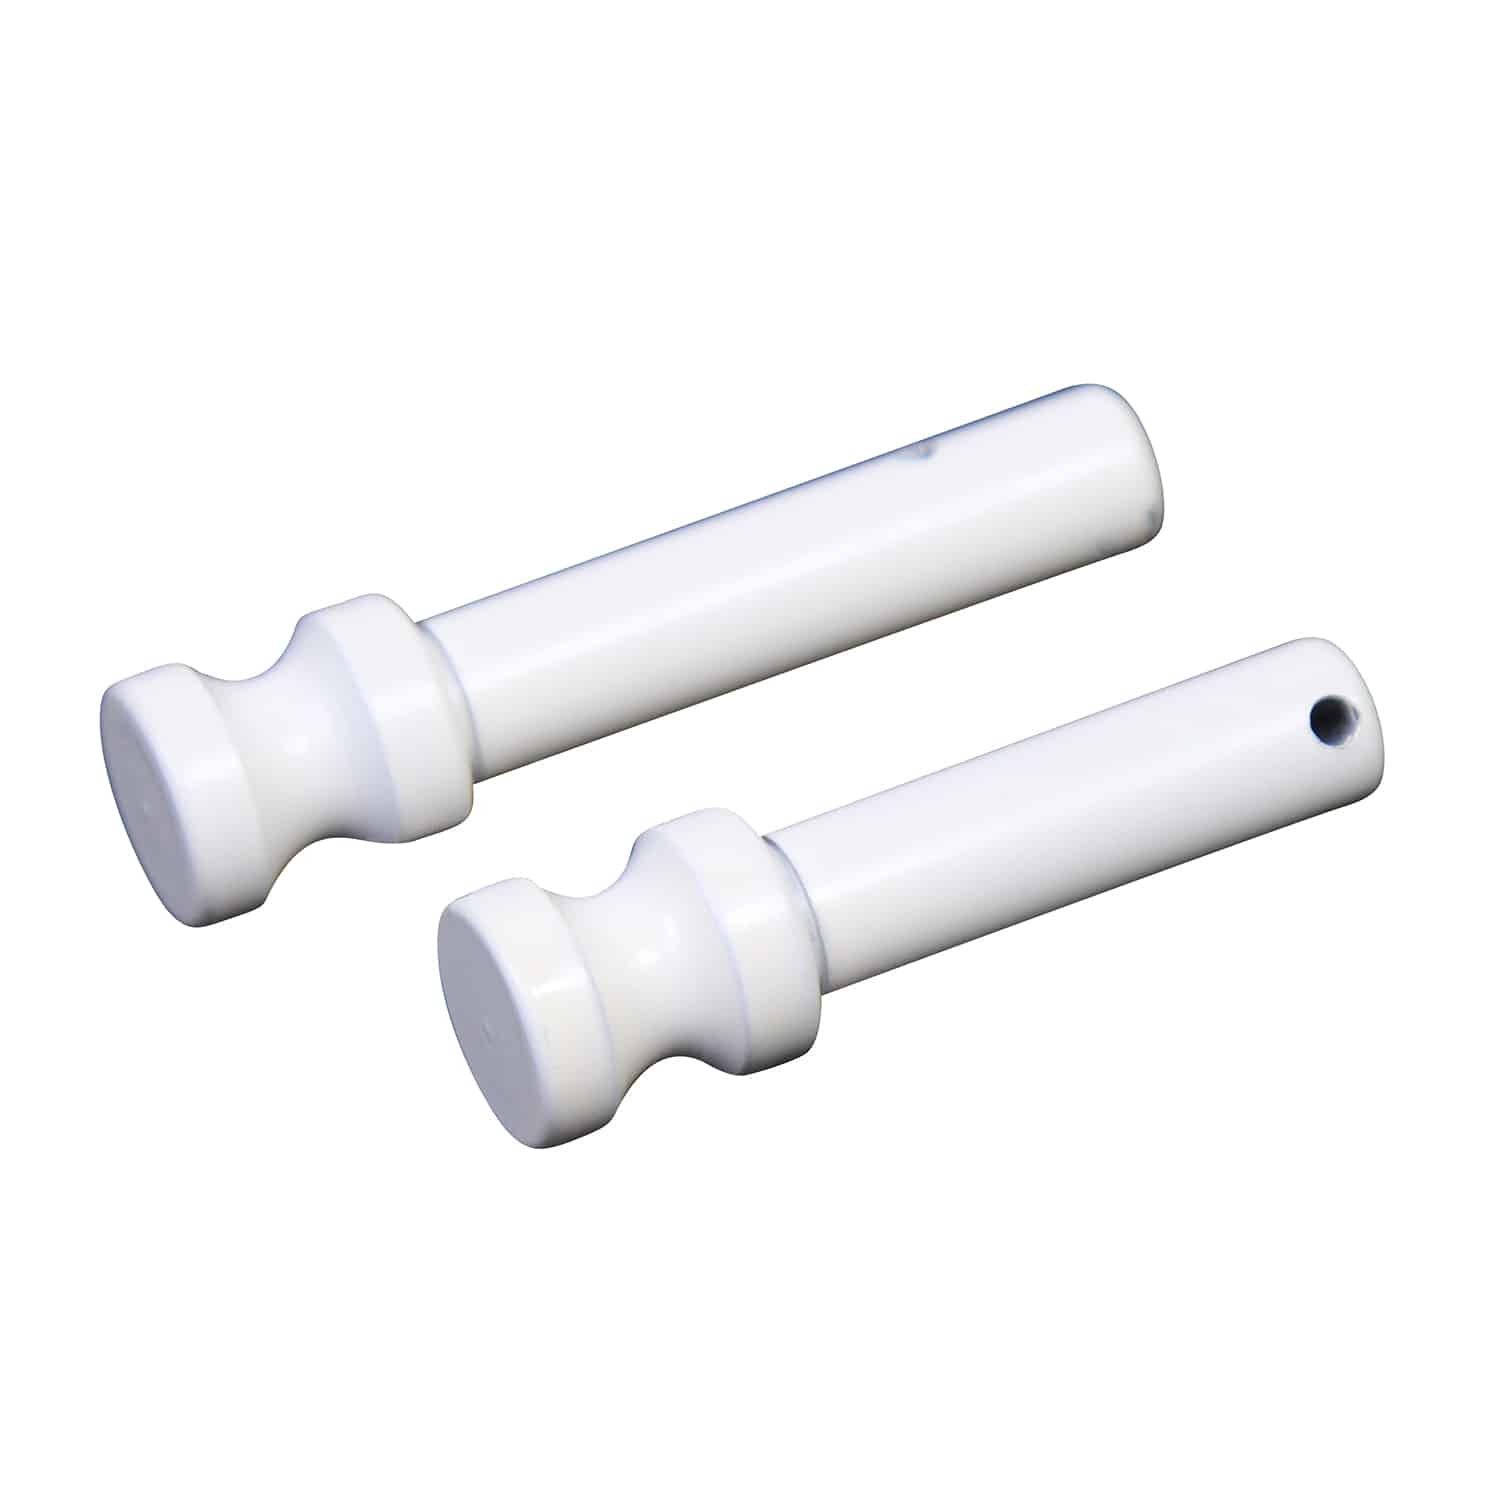 AR 5.56 Cal Extended Takedown Pin Set in Arctic White